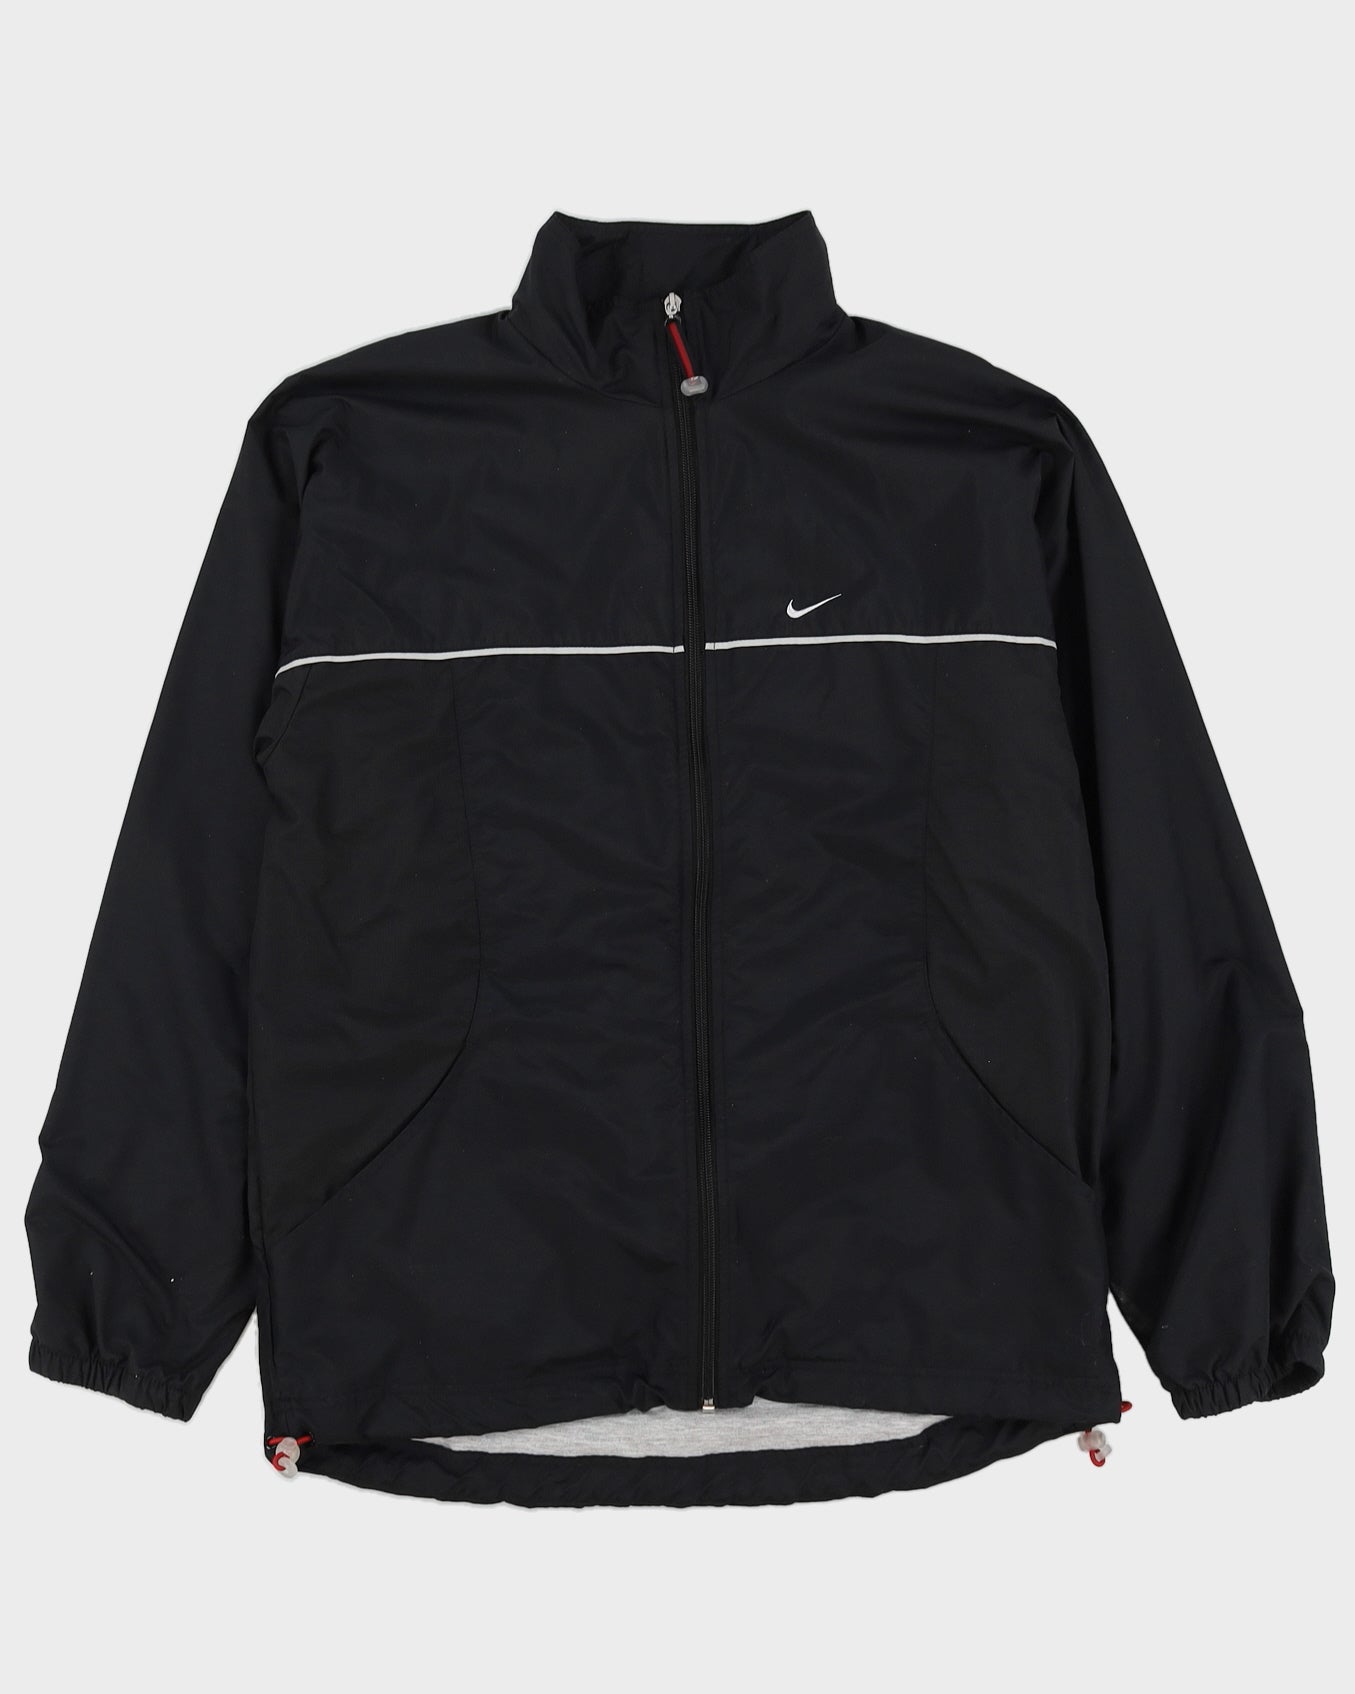 00s Y2K Nike Black Track Jacket With Embroidery On The Back - S